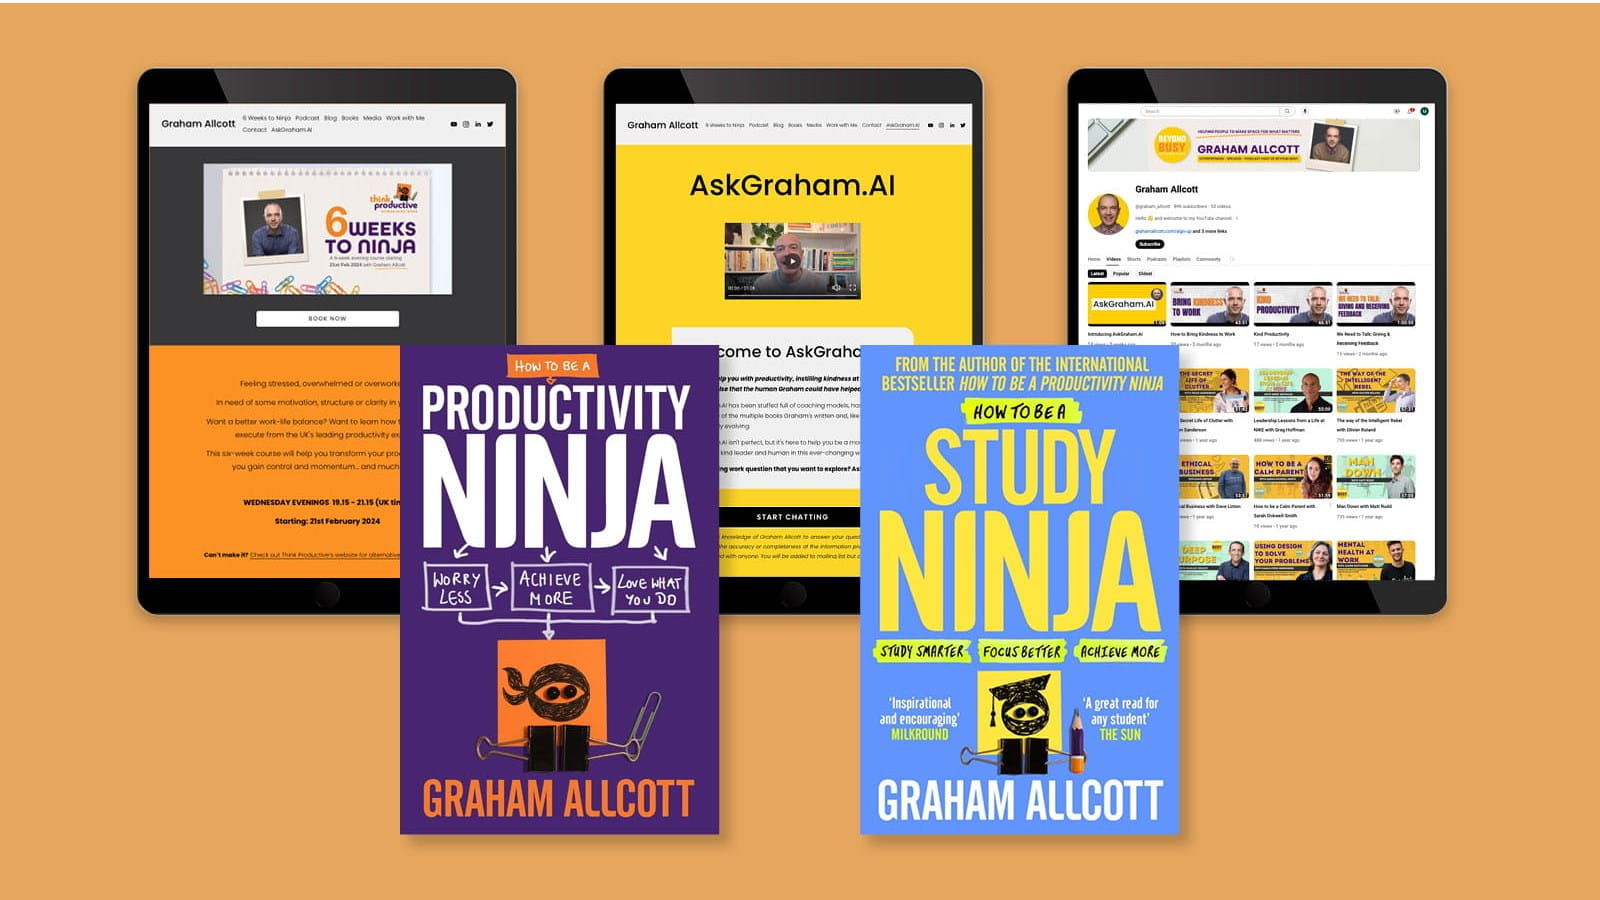 Book covers websites How to be a Productivity Ninja by Graham Allcott orange background